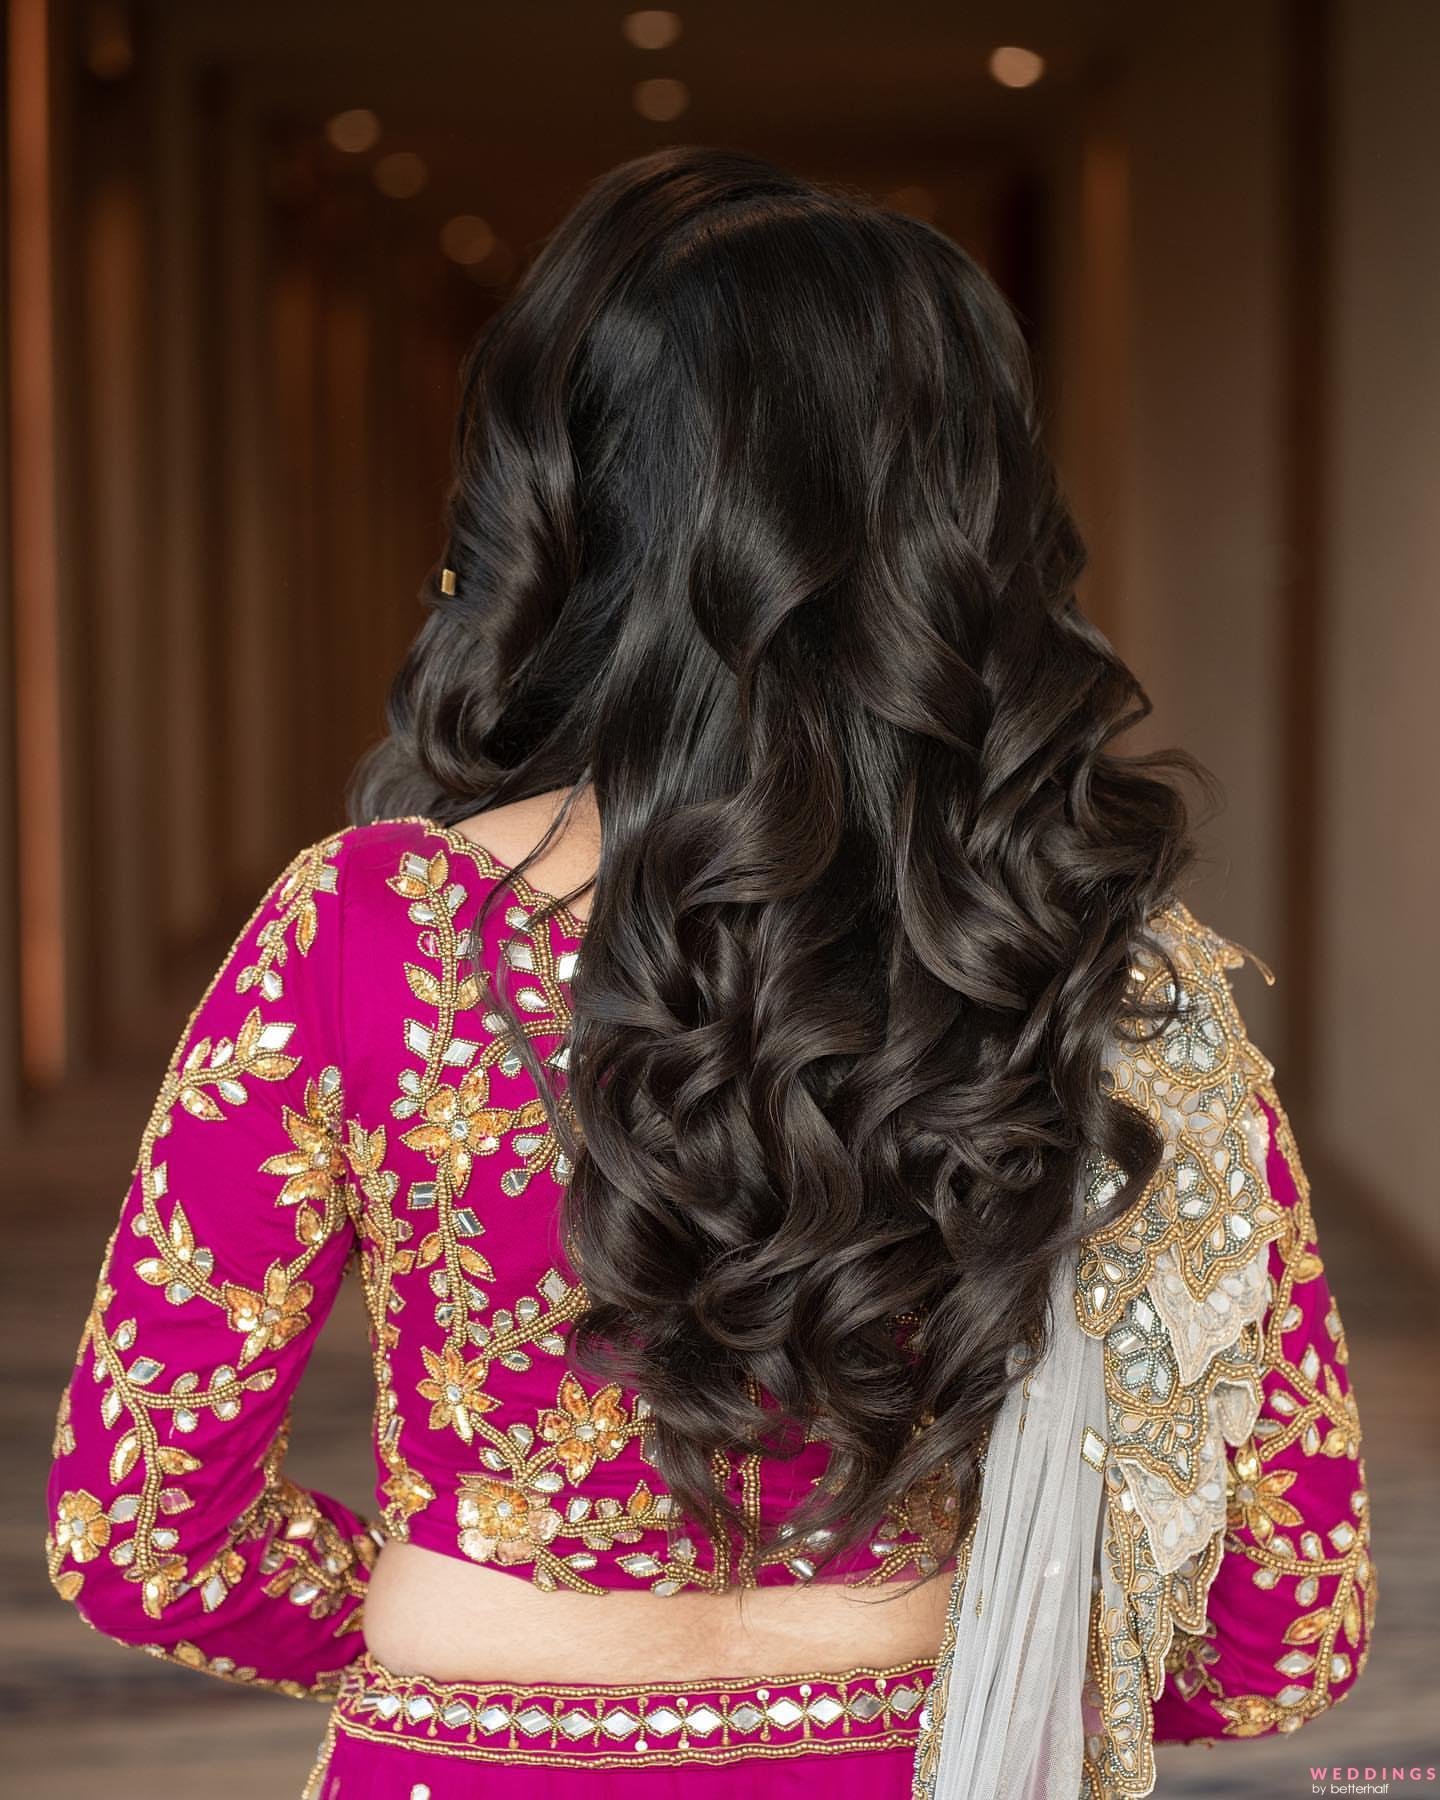 Wedding planning inspiration for Bridal hairstyle